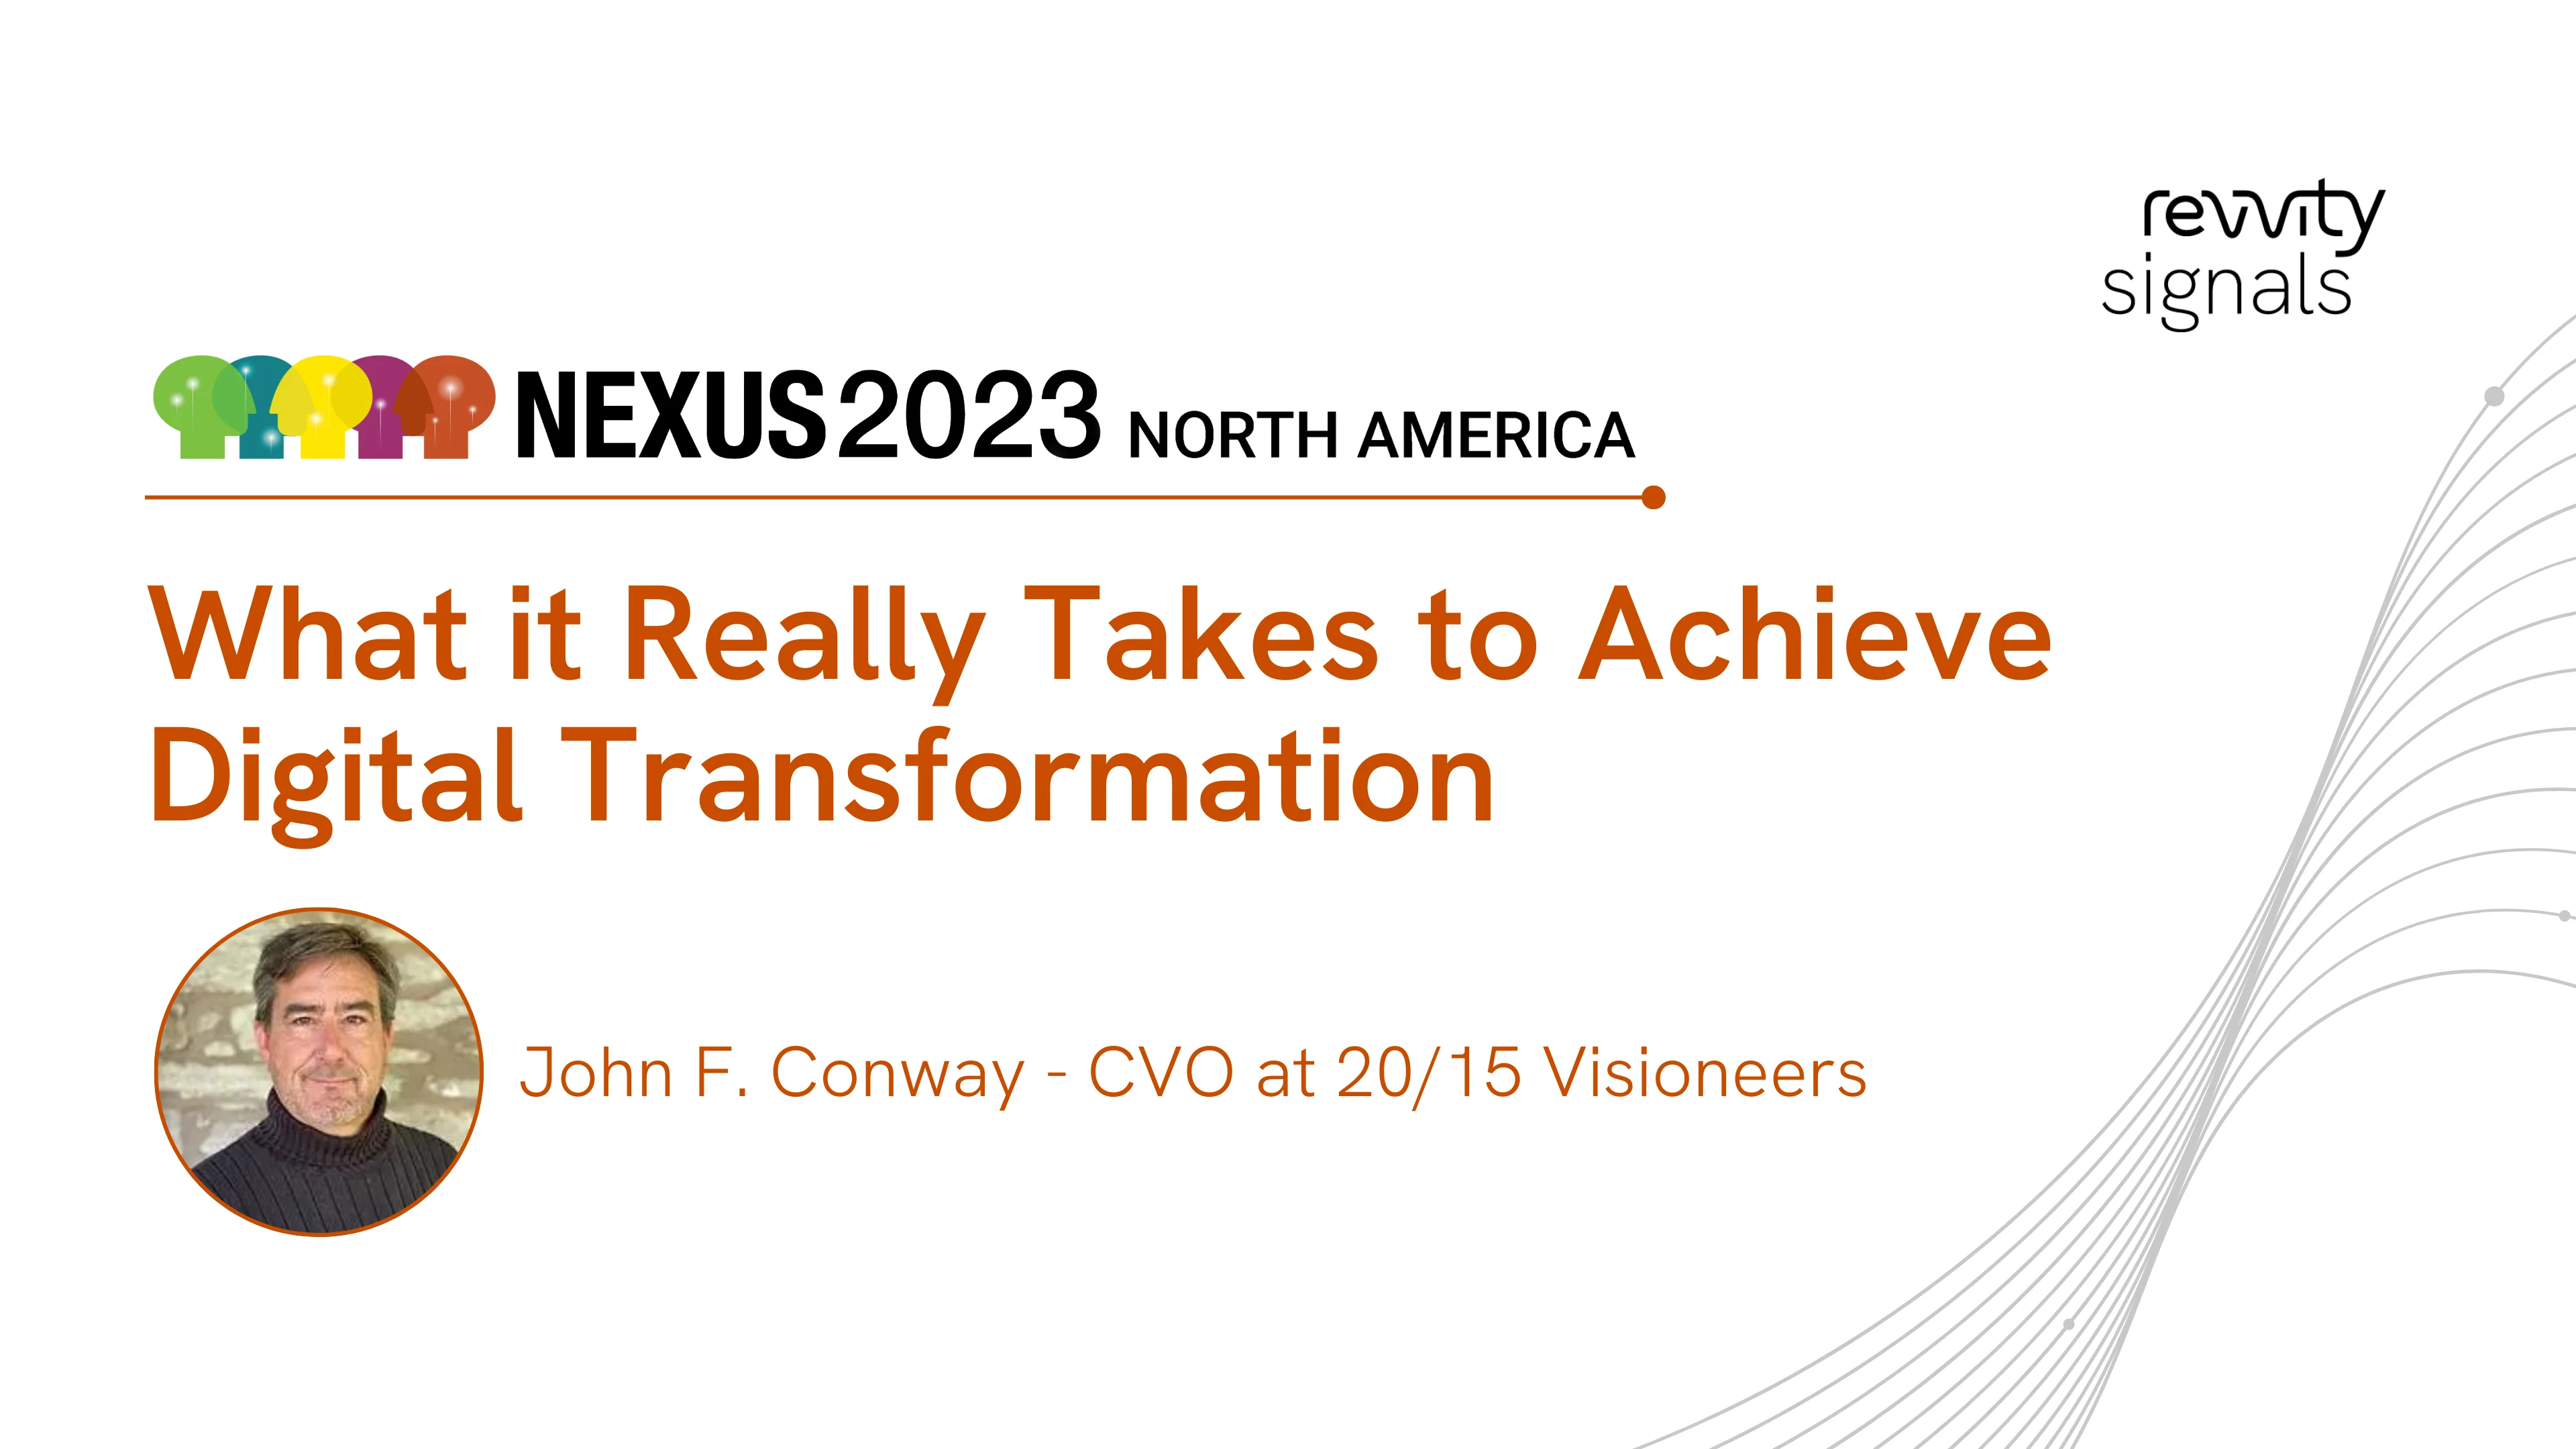 Watch Day 2, NA NEXUS 2023 - What it Really Takes to Achieve Digital Transformation on Vimeo.